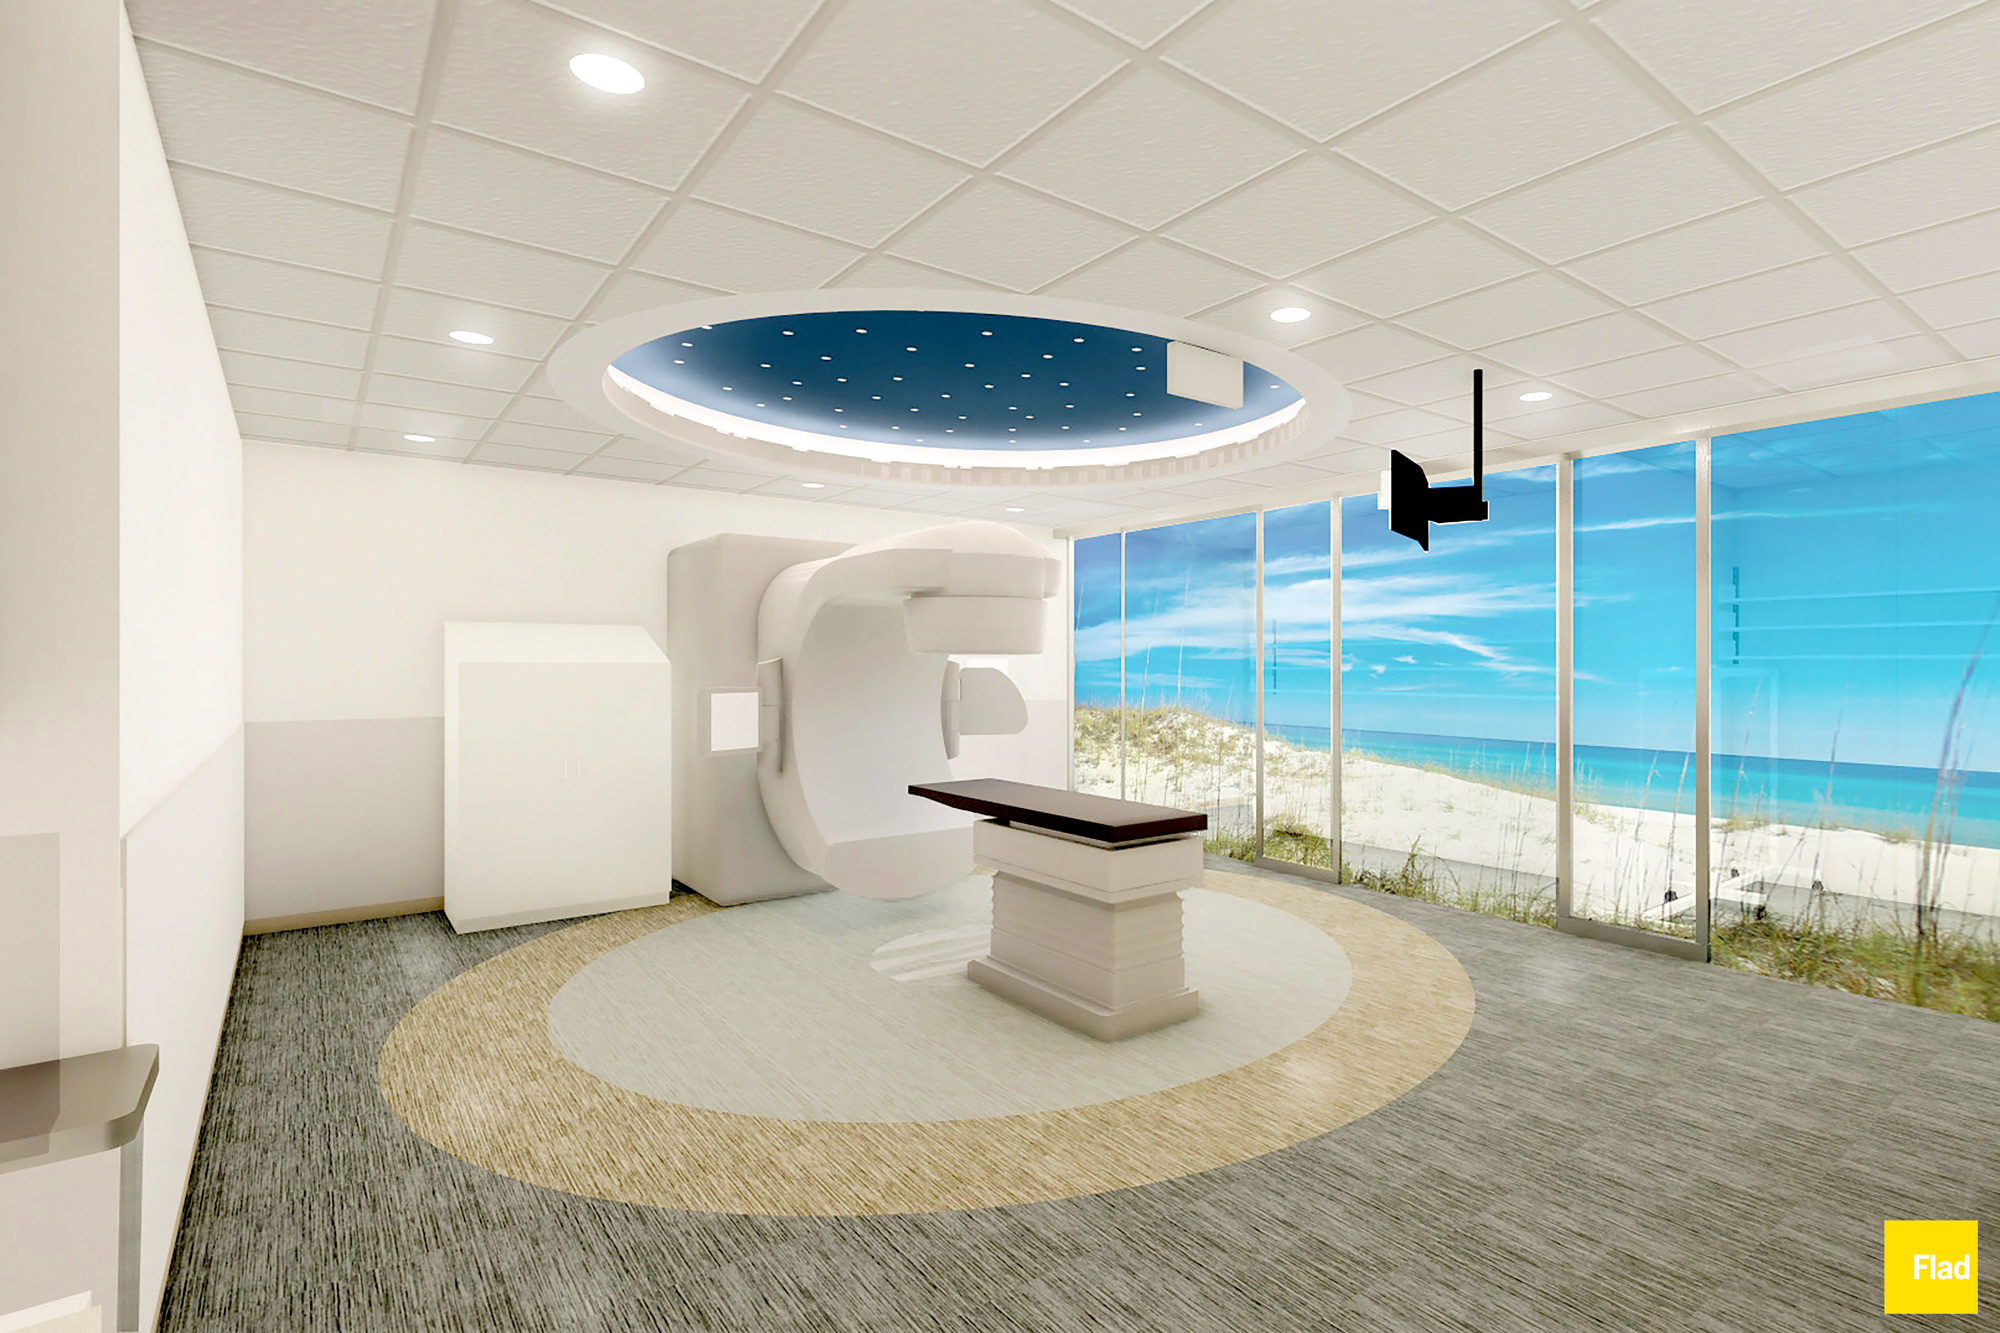 Linear accelerators, used for radiation treatment, will be located within Sarasota Memorial Health Care System's new radiation oncology center, which will open in August 2020. (Courtesy of SMH)